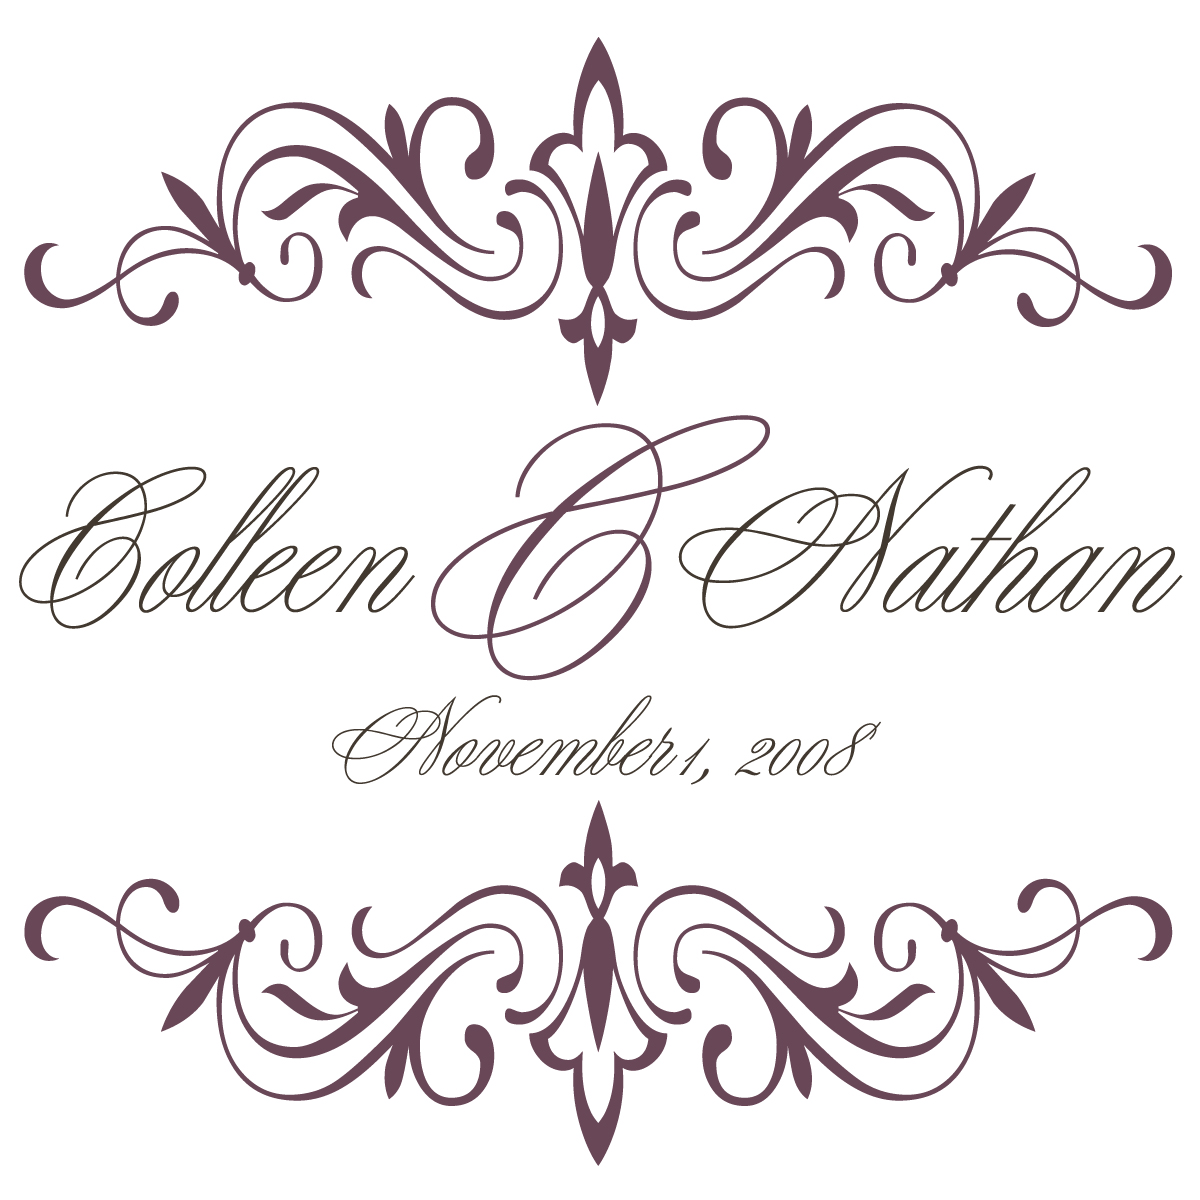 [Colleen_&_Nathan_1a_revised_copy.jpg]